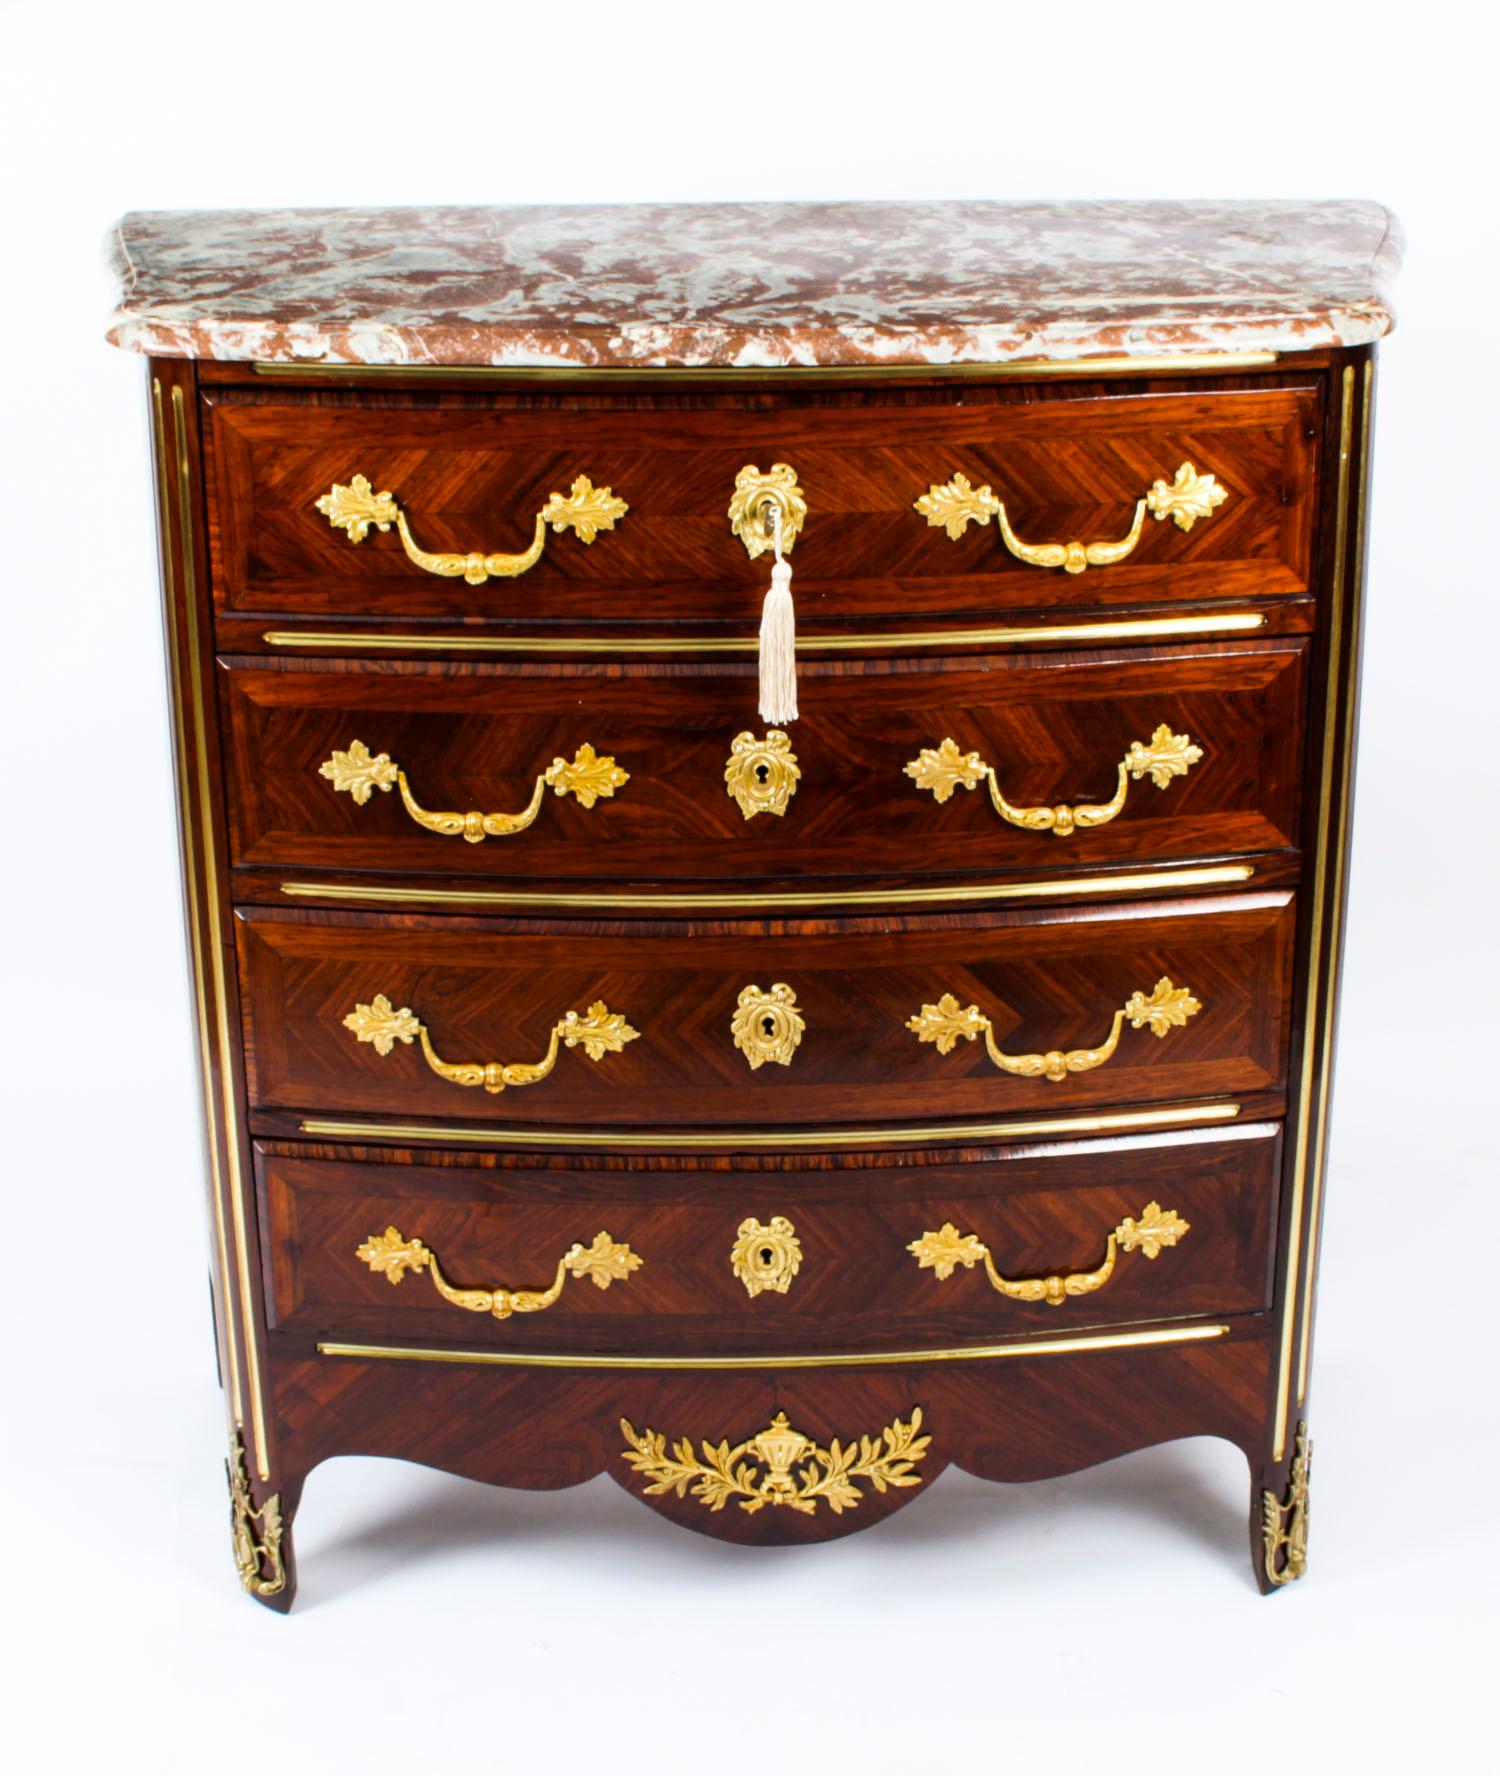 This is a lovely French antique ormolu-mounted Gonçalo Alves bow fronted commode, circa 1880 in date.

The Gonçalo Alves is complimented with exquisite kingwood crossbanded decoration and striking ormolu mounts.

The commode has four useful full